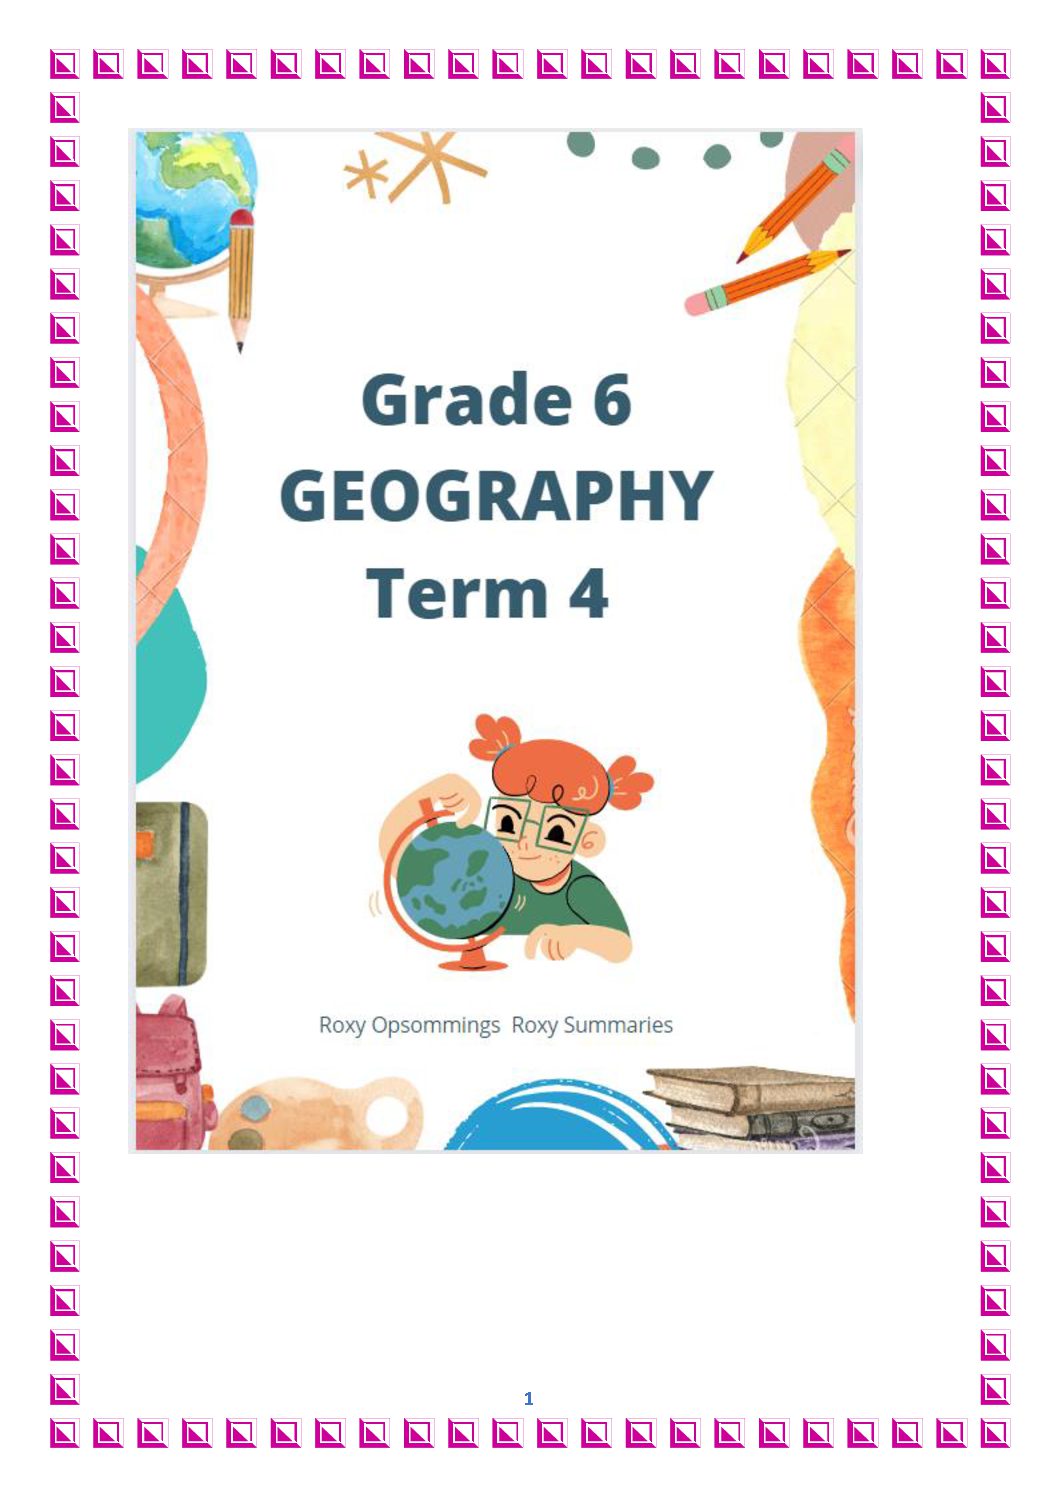 GEOGRAPHY CONTENT • Teacha